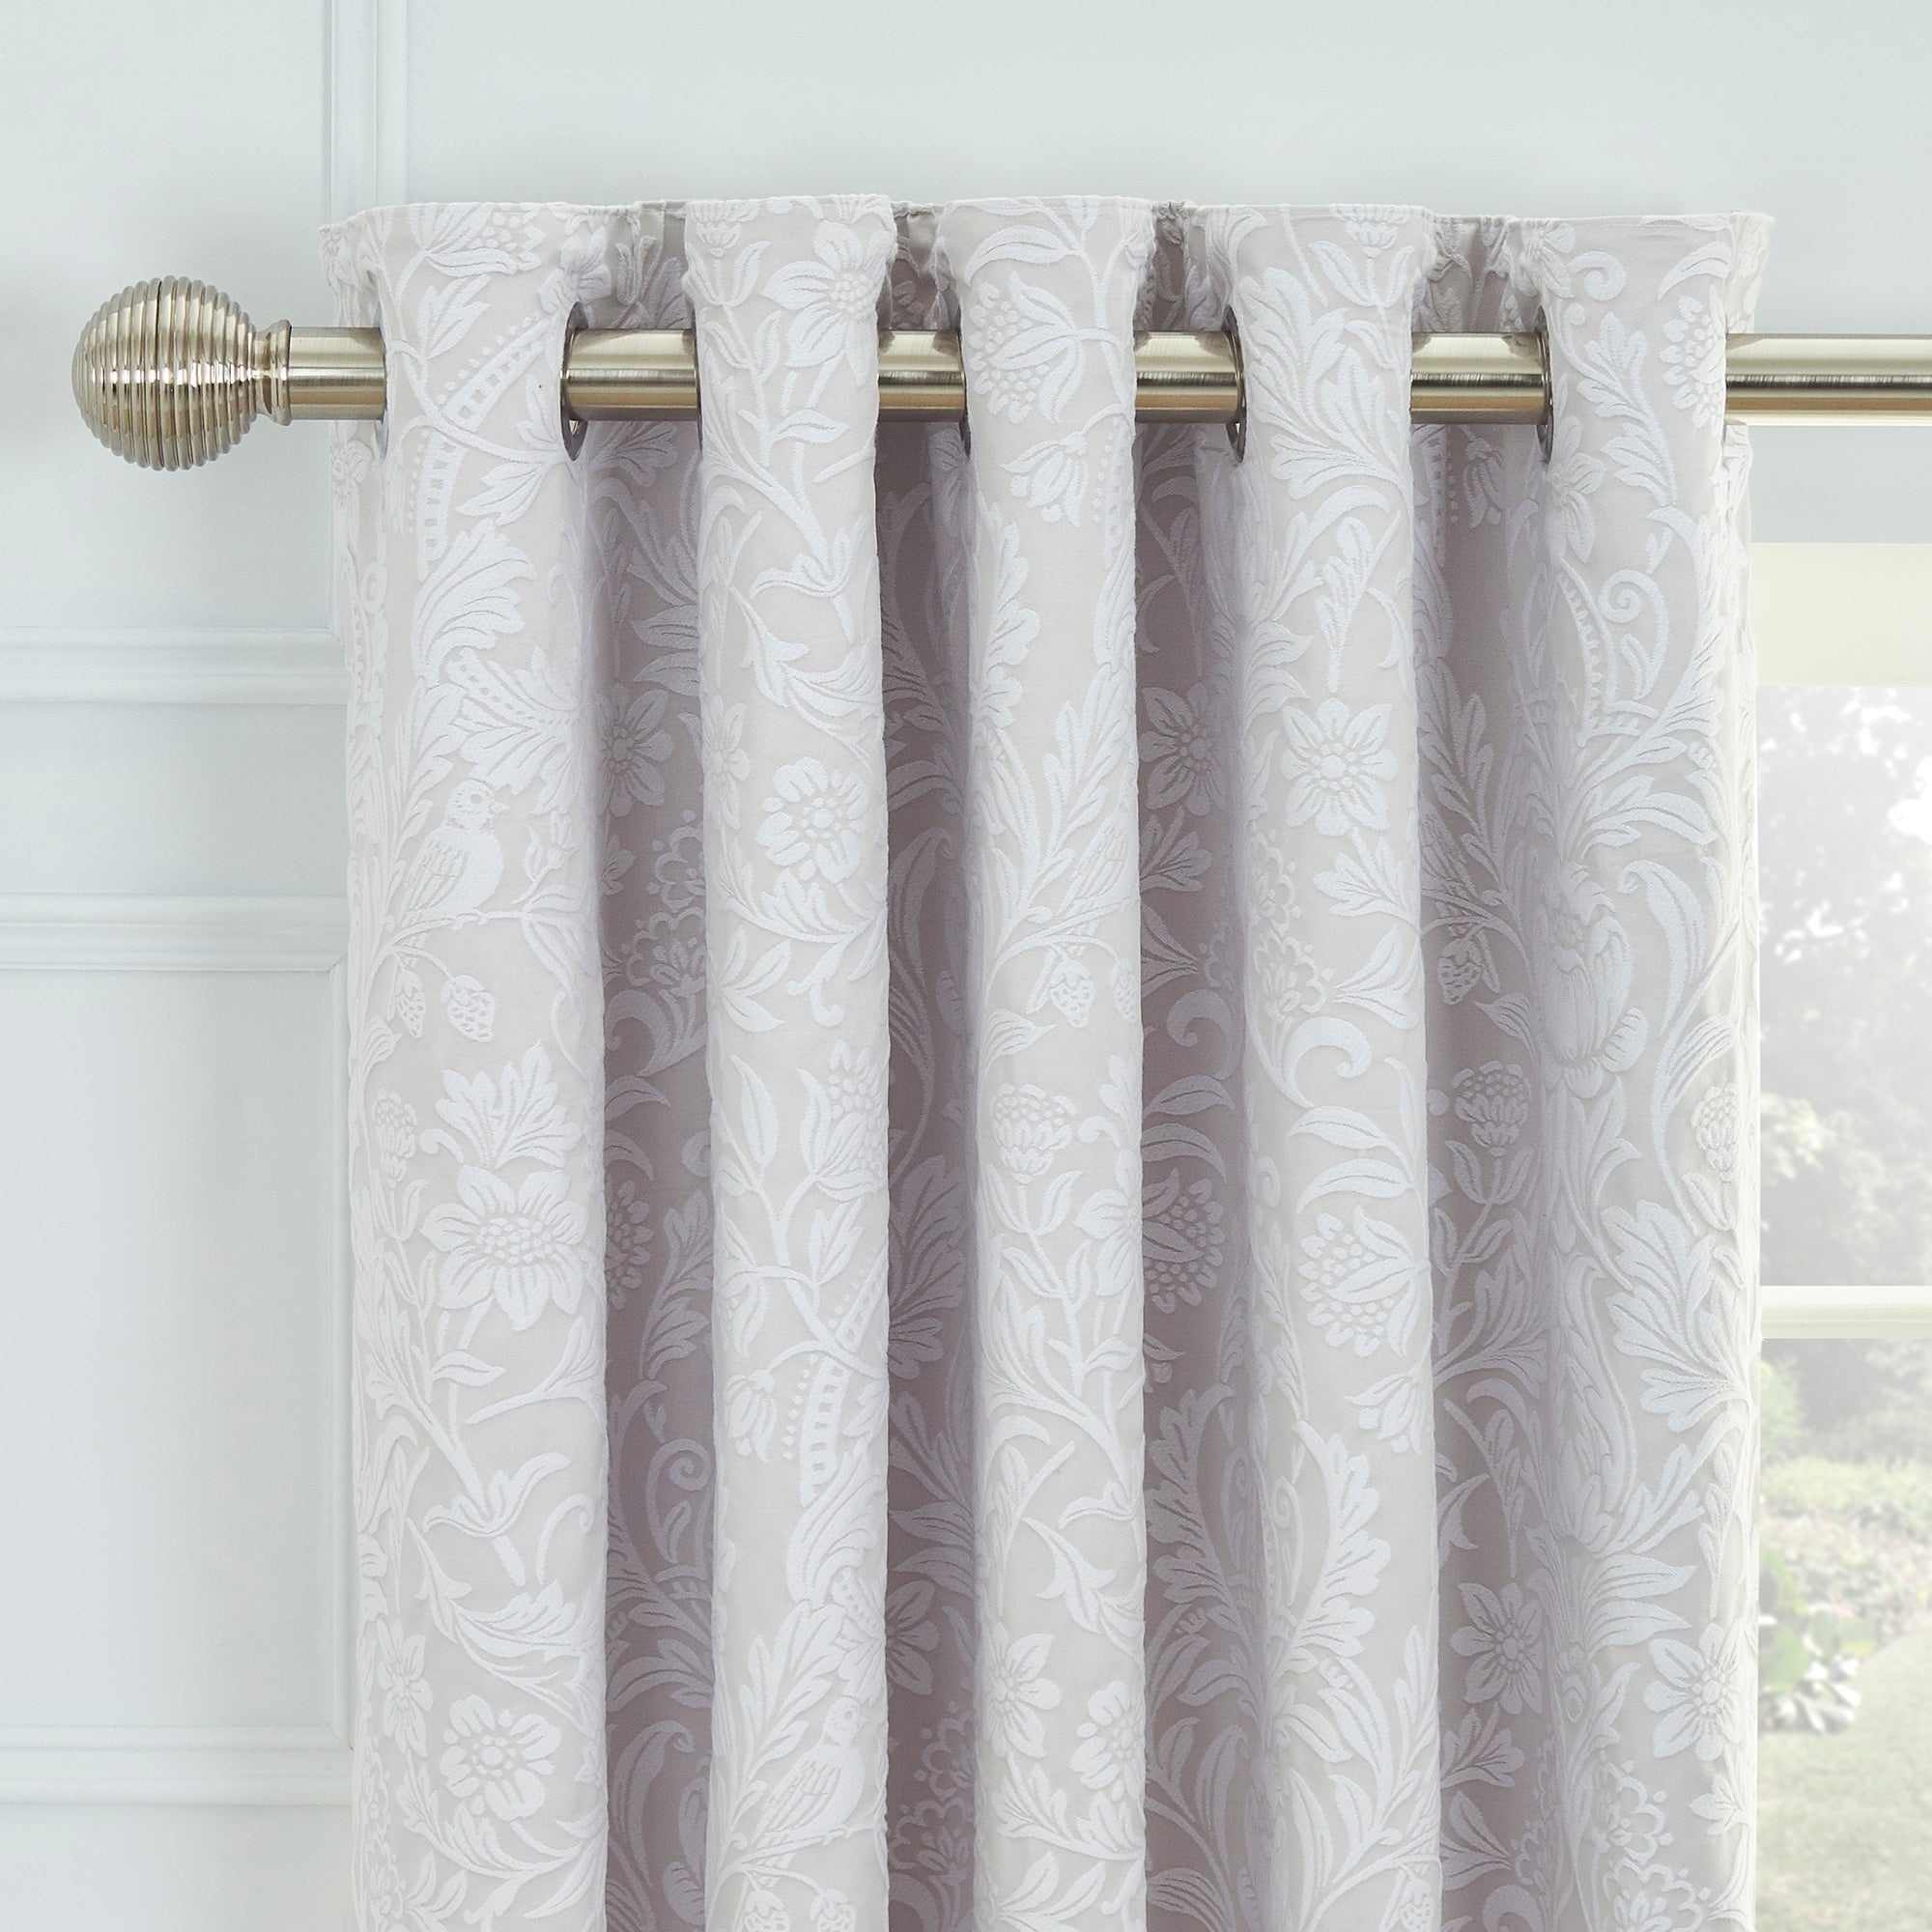 Dorma Winchester Blackout Eyelet Curtains